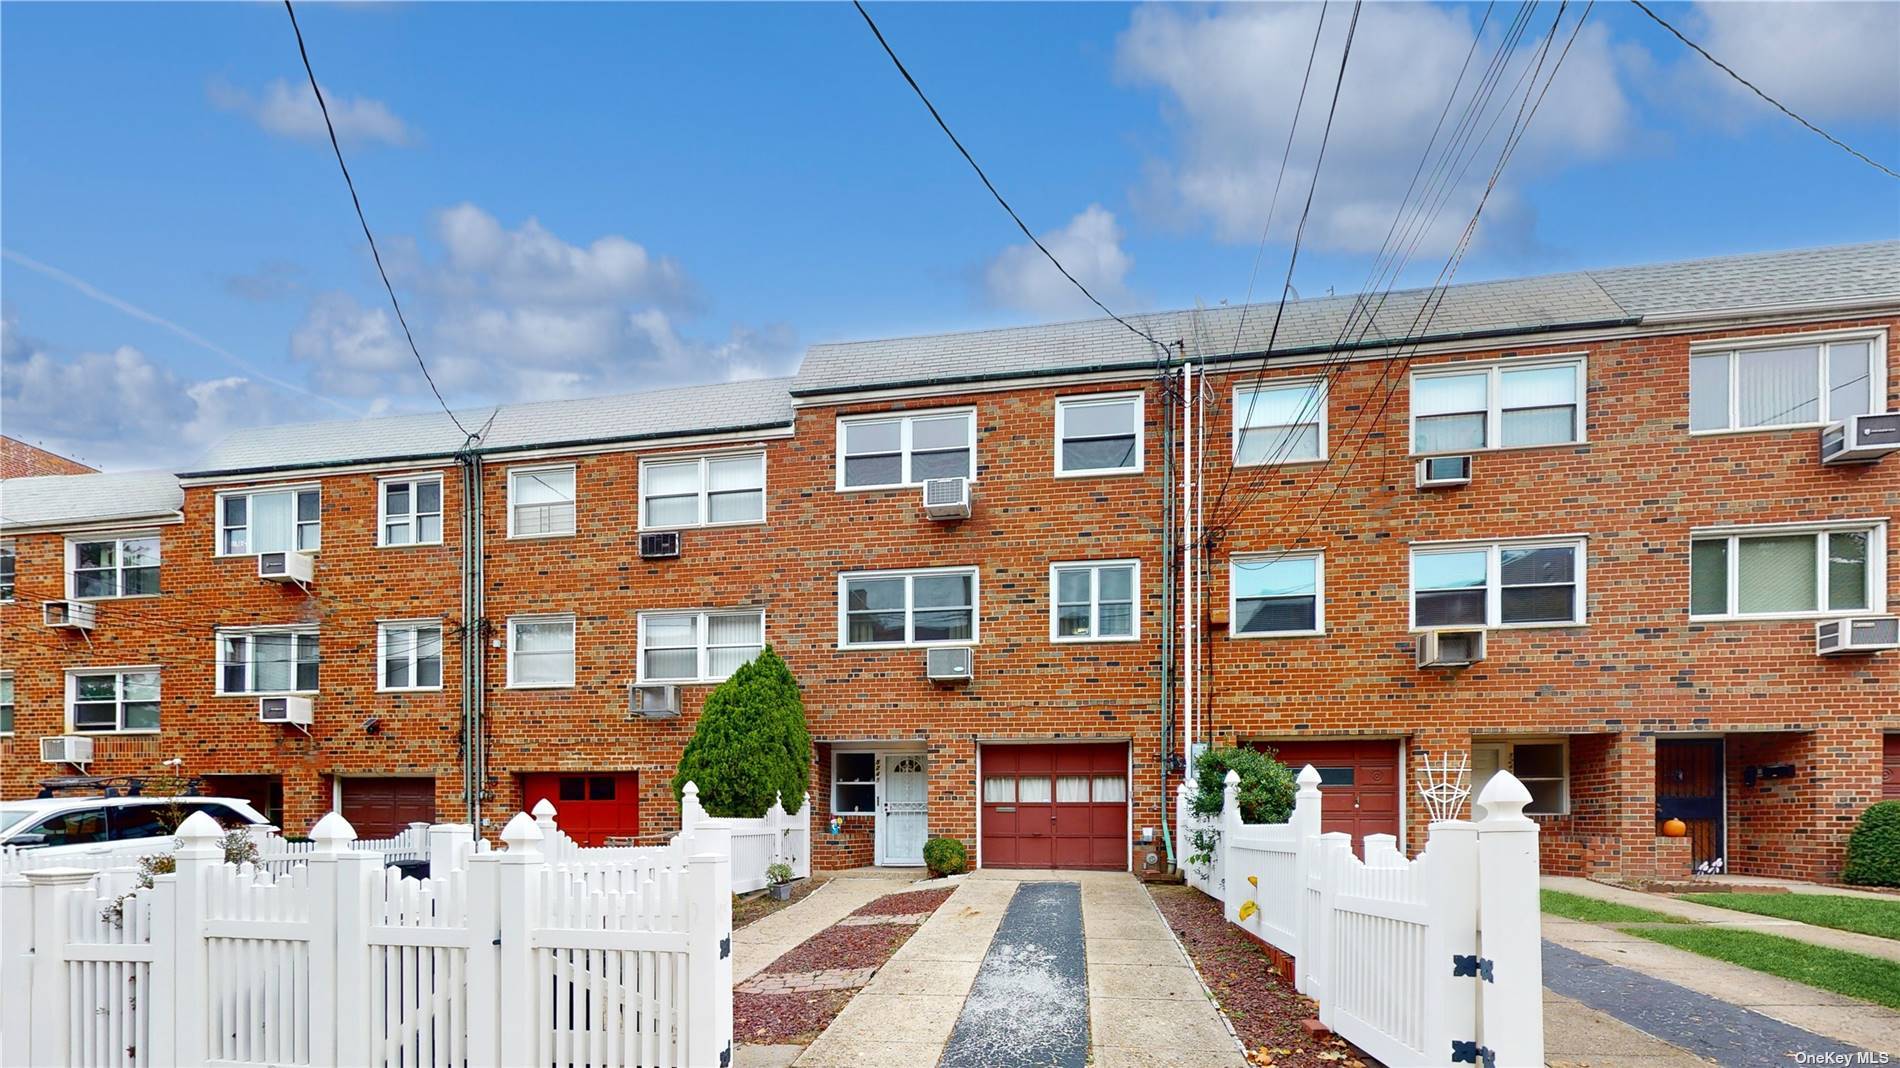 This very rare multifamily home in Maspeth Plateau offers endless possibilities to its future owner with three floors of living space all with separate electrical meters.